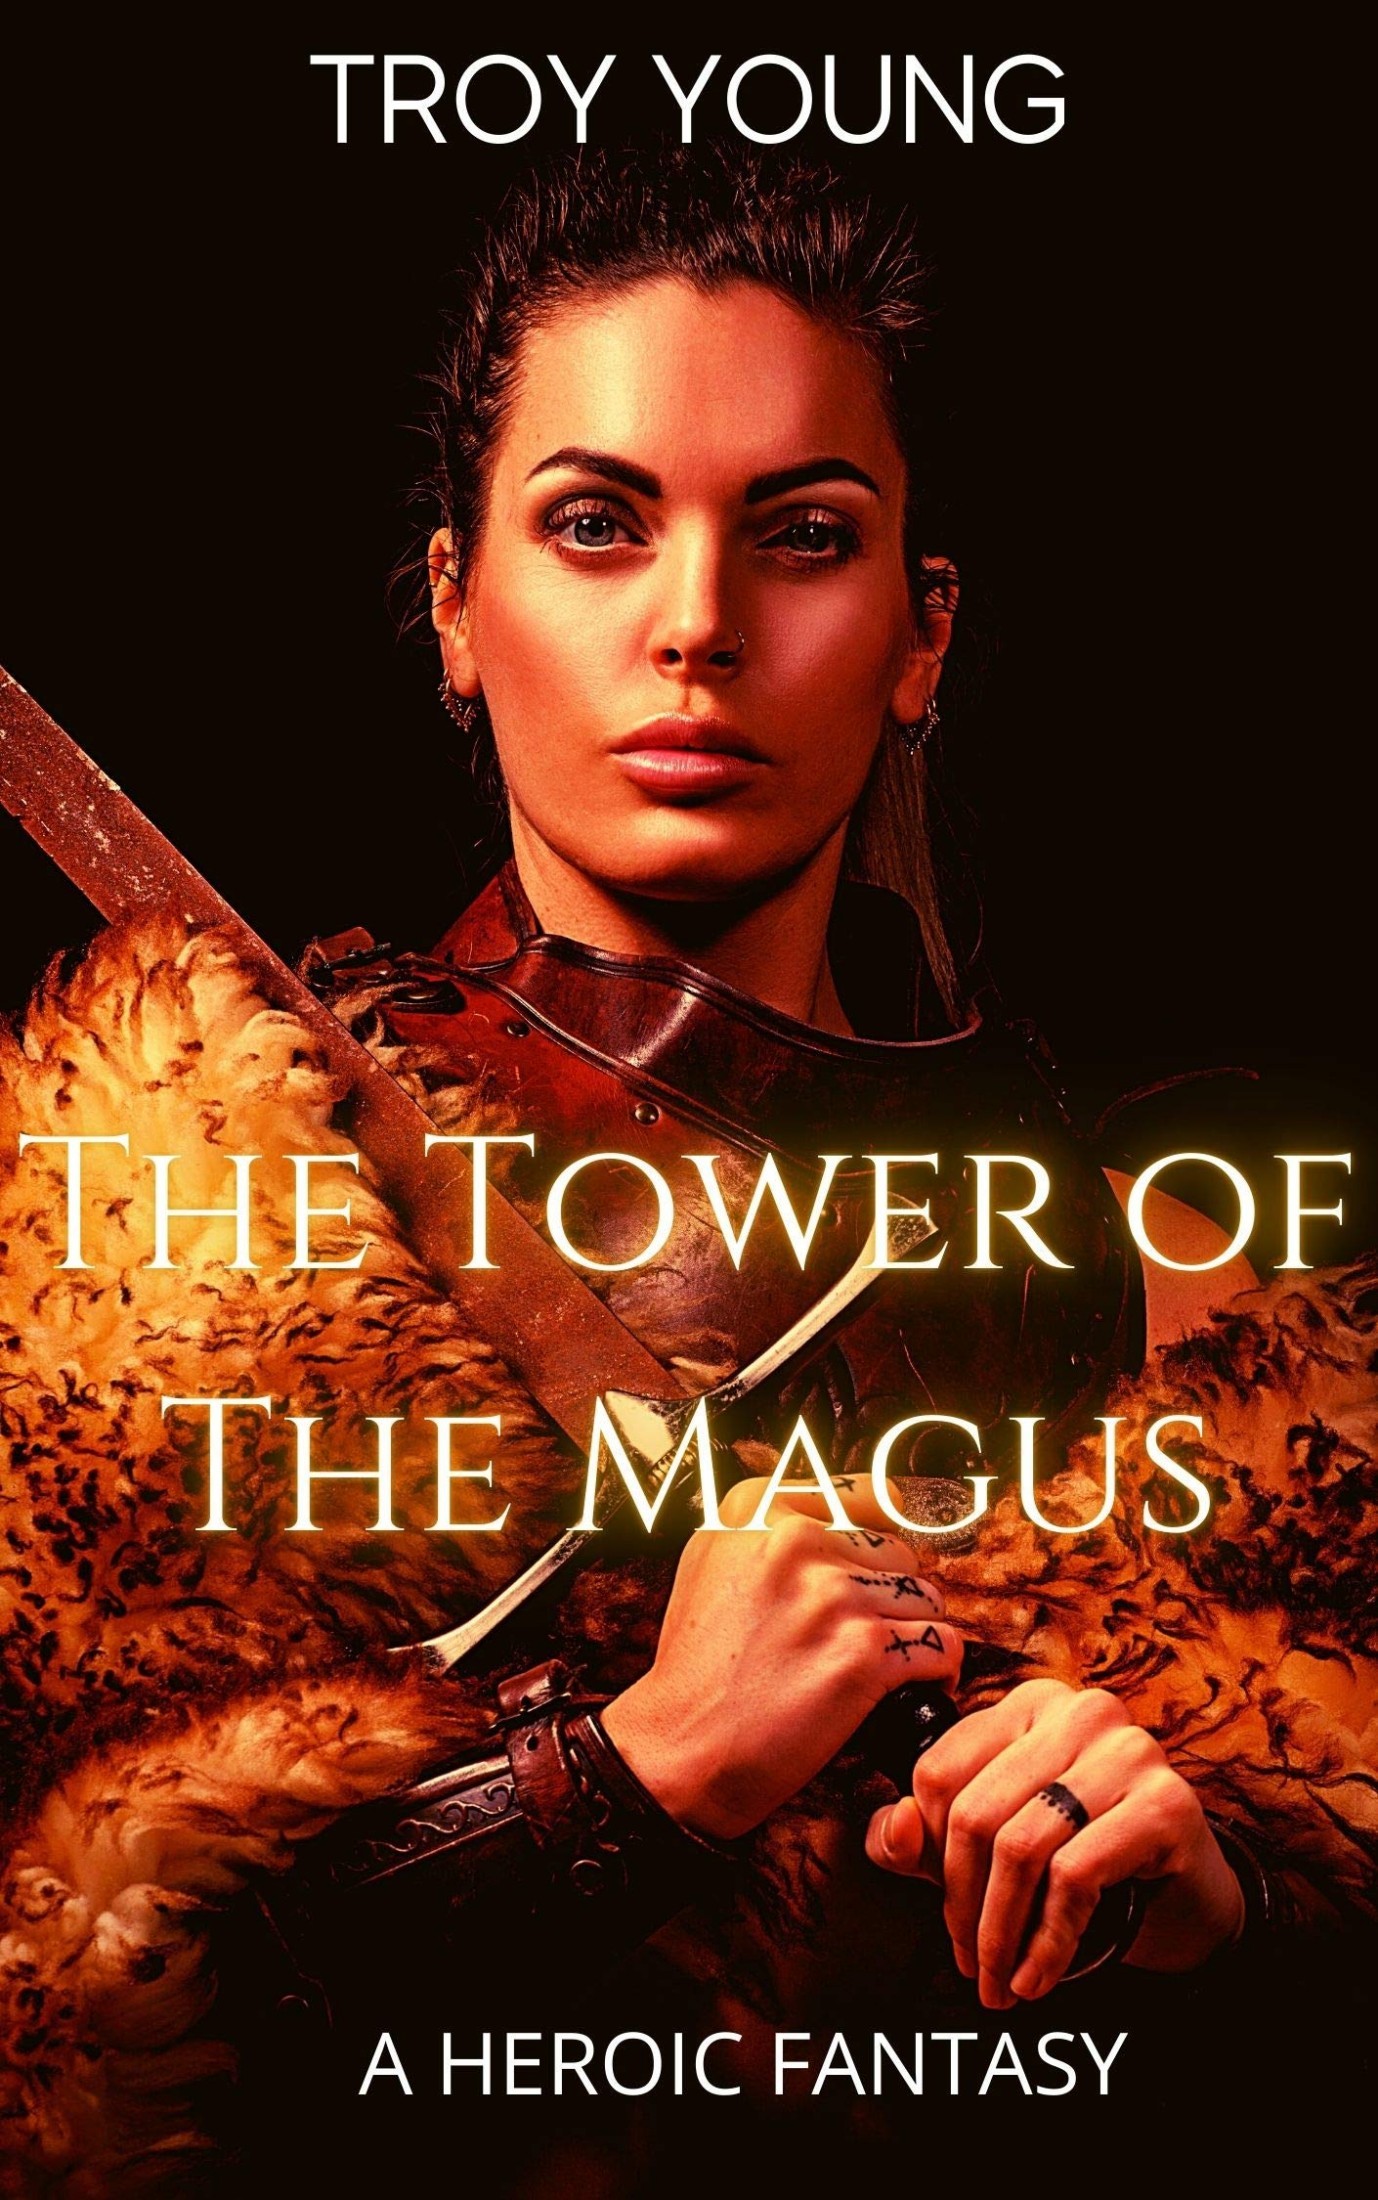 The Tower of the Magus